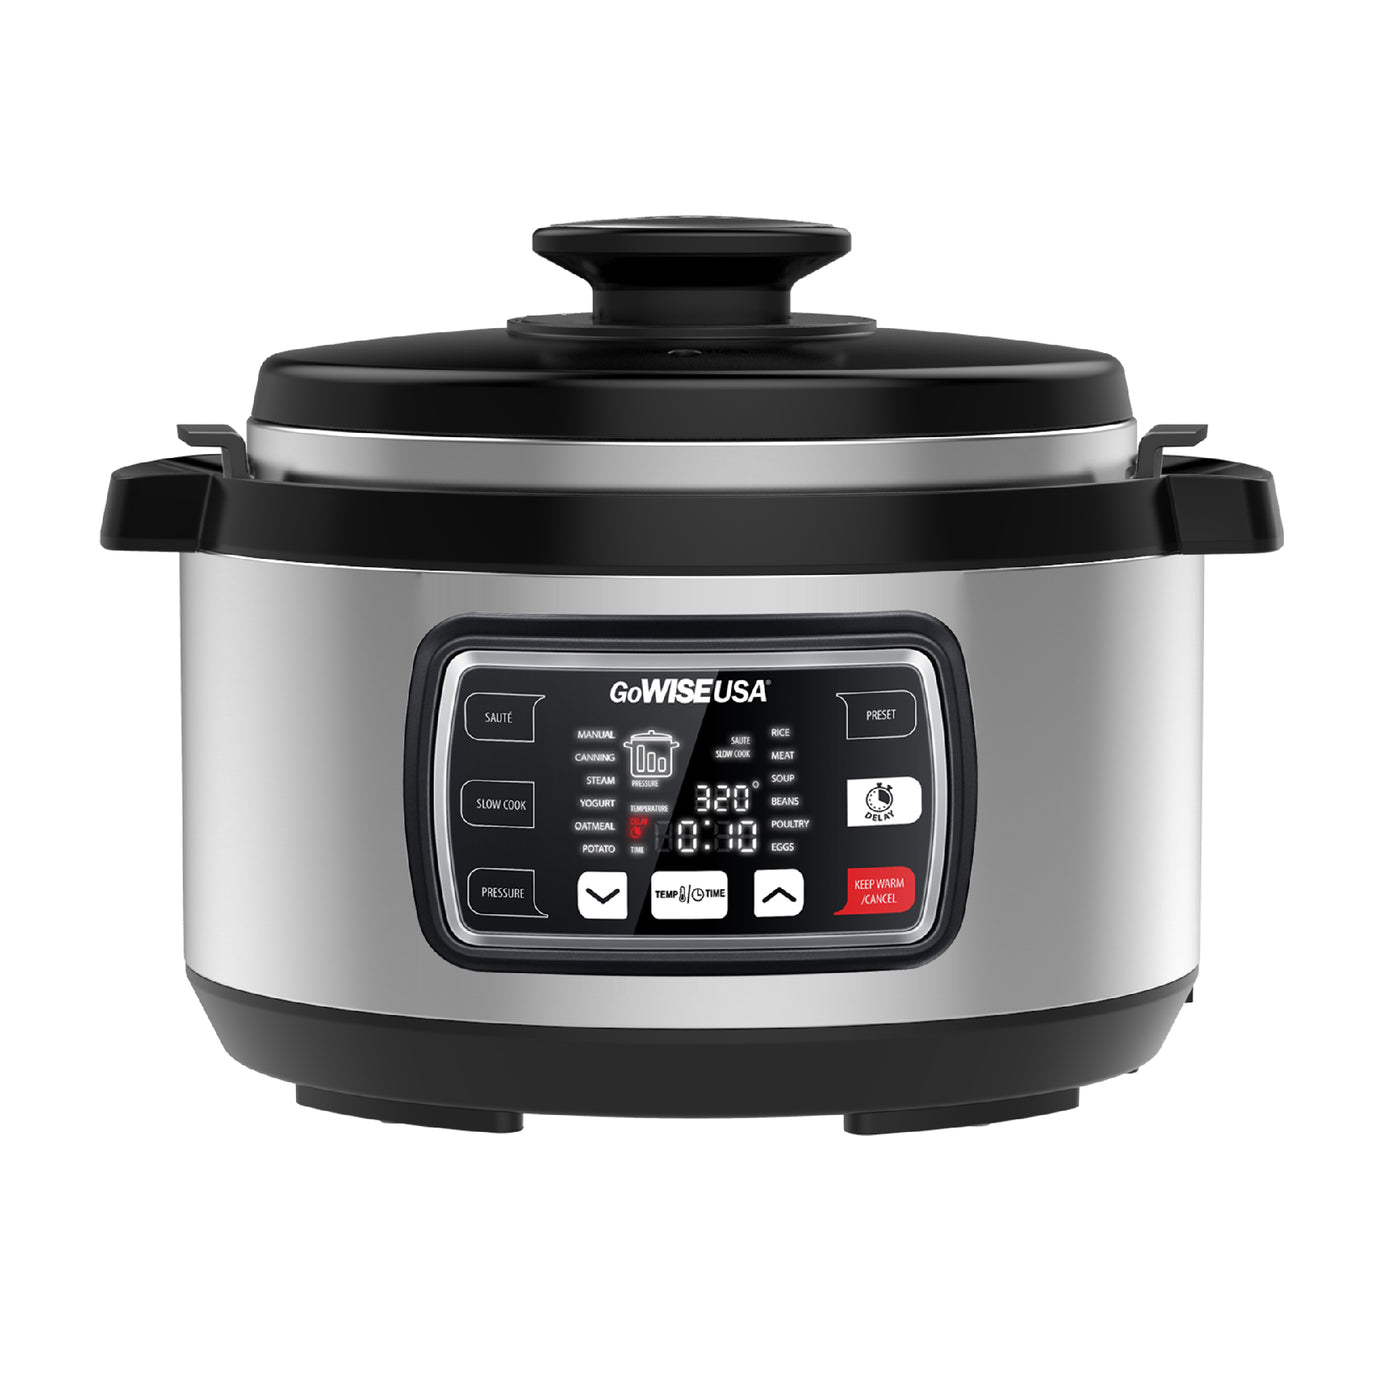 Ovate Pressure Cookers